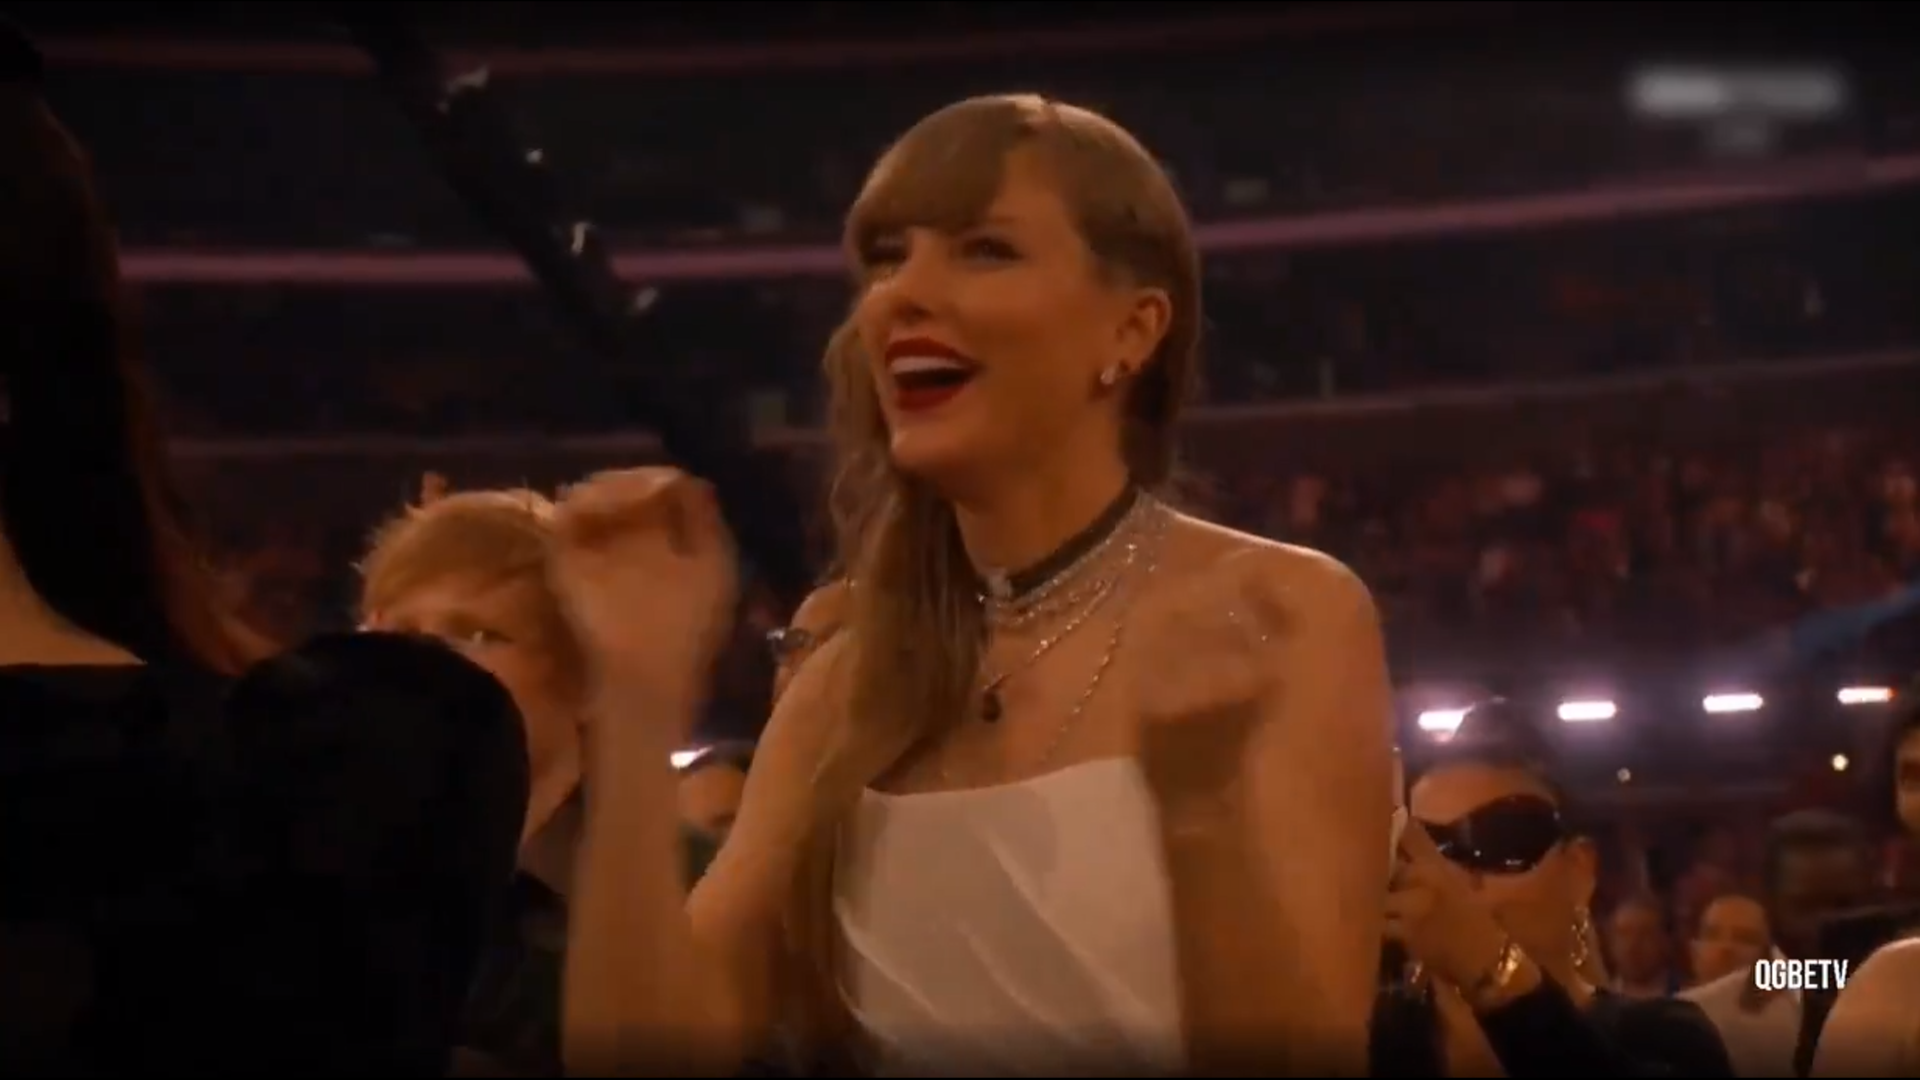 However, Taylor enthusiastically sang Dion's hit "The Power of Love" when she took to the stage for her surprise appearance at the ceremony. (Photo: X)